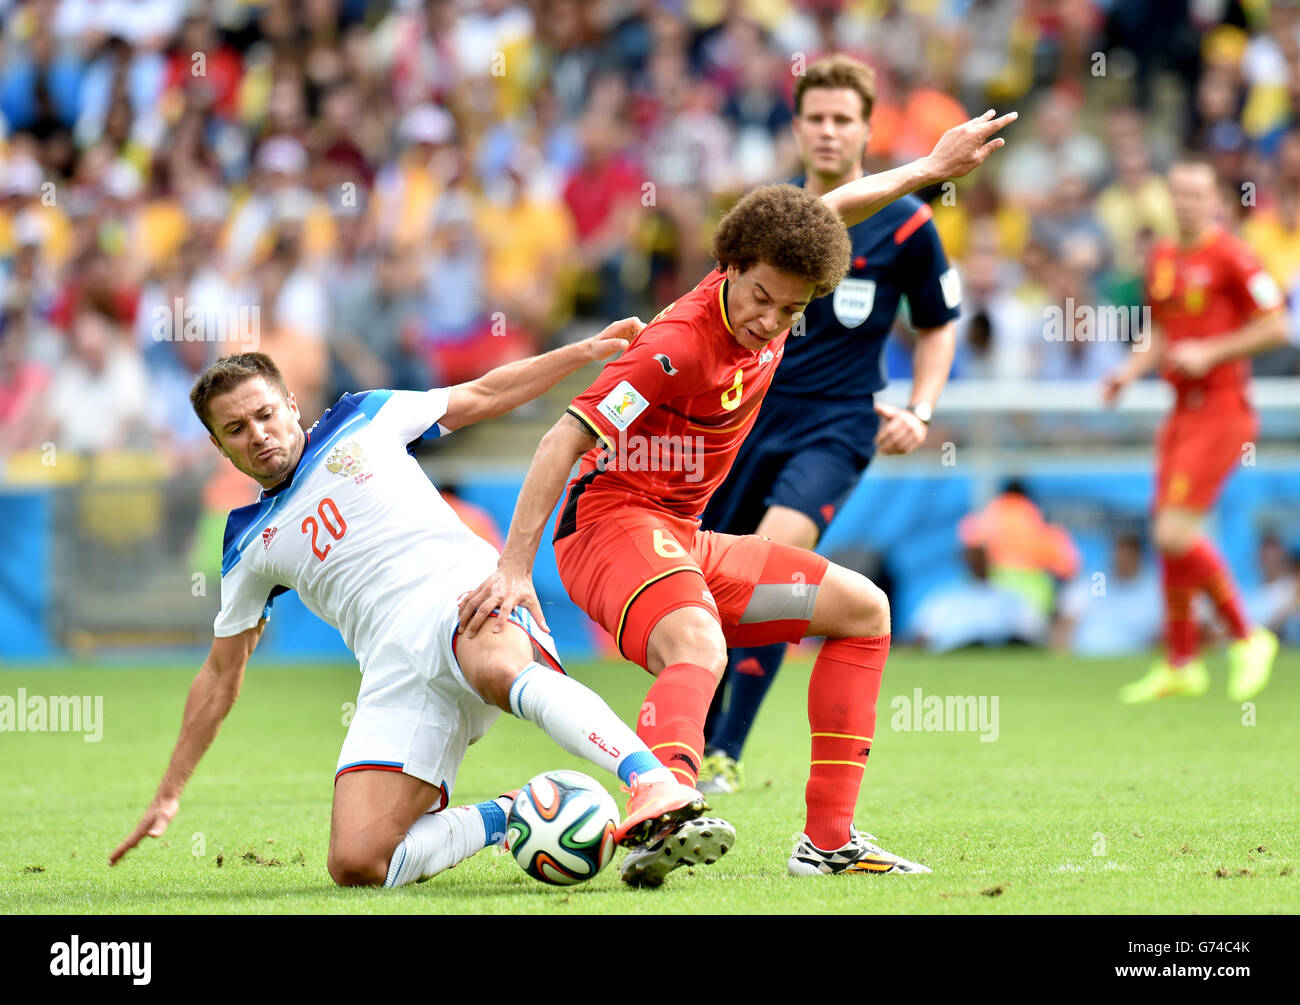 Soccer - FIFA World Cup 2014 - Group H - Belgium v Russia - Maracana. Belgium's Axel Witsel and Russia's Viktor Fayzulin battle for the ball Stock Photo